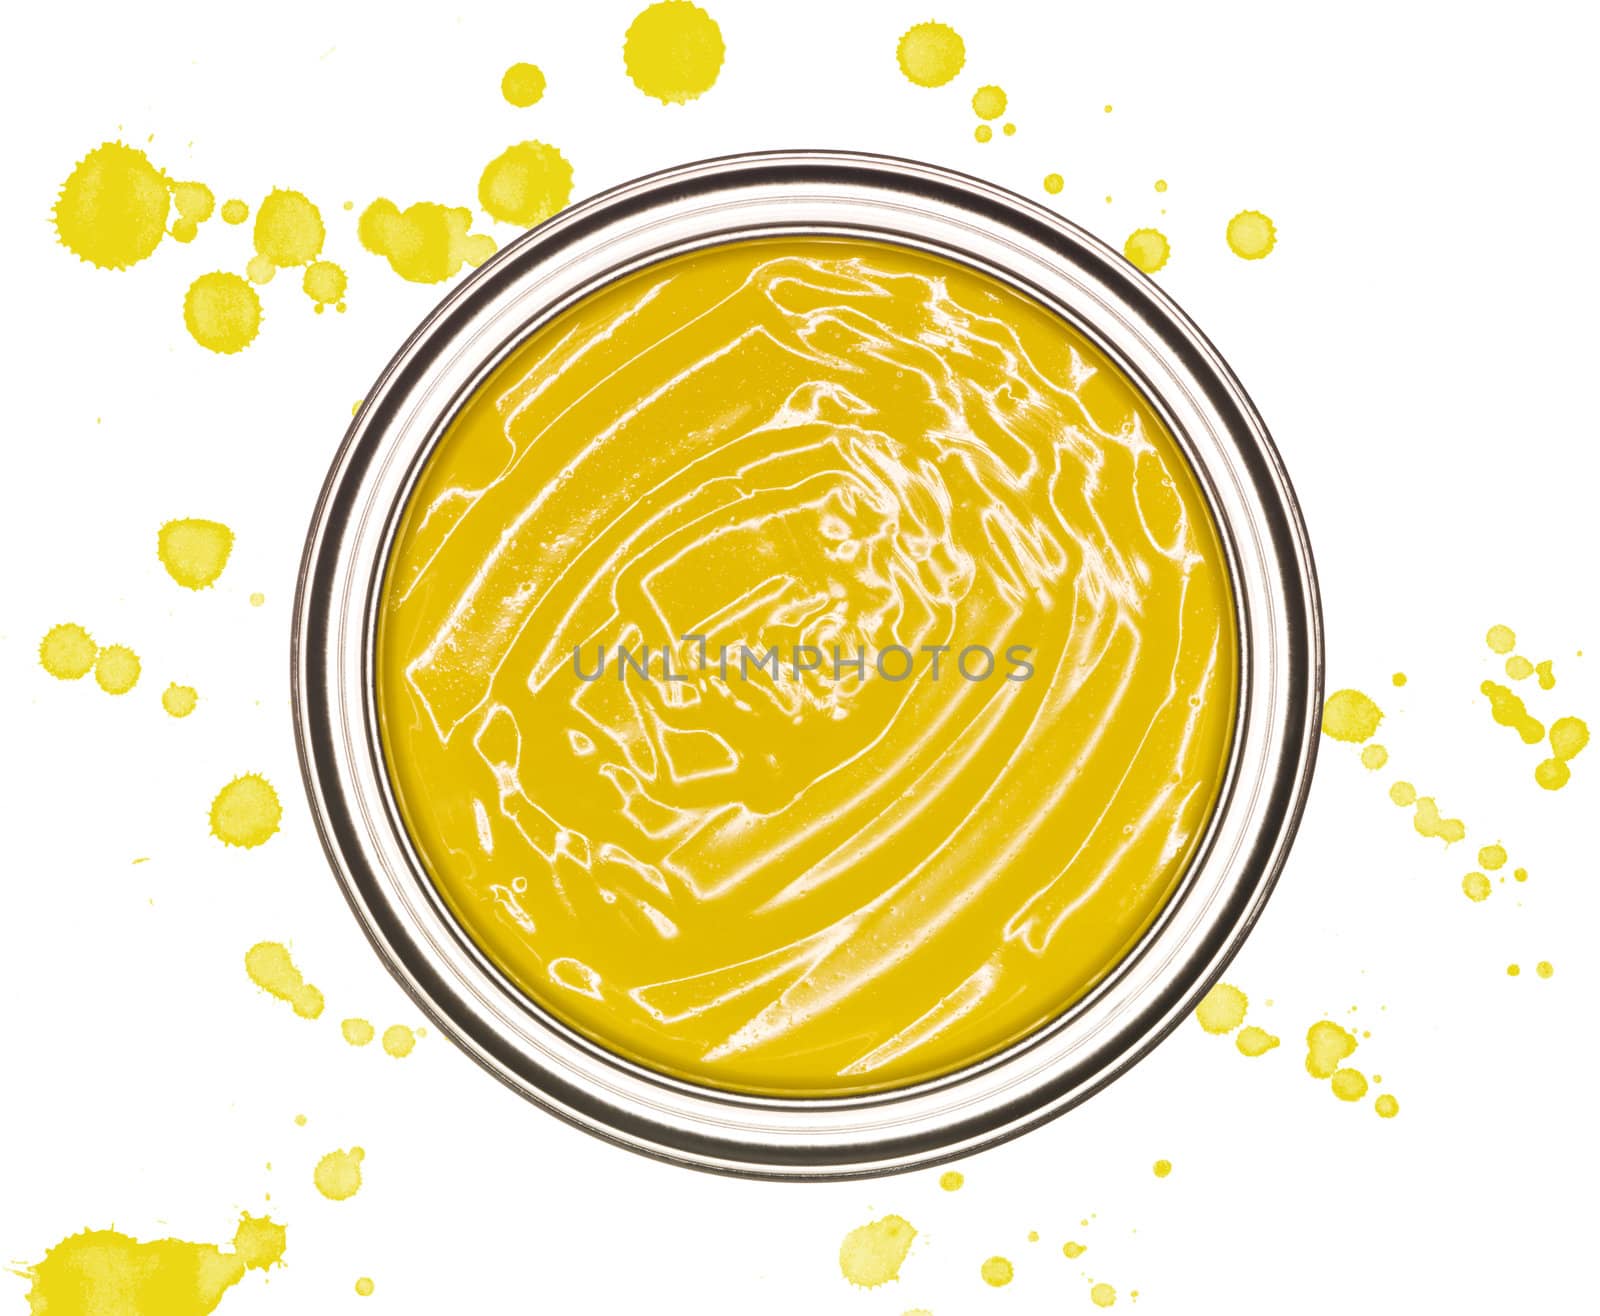  Yellow Paint can by gemenacom